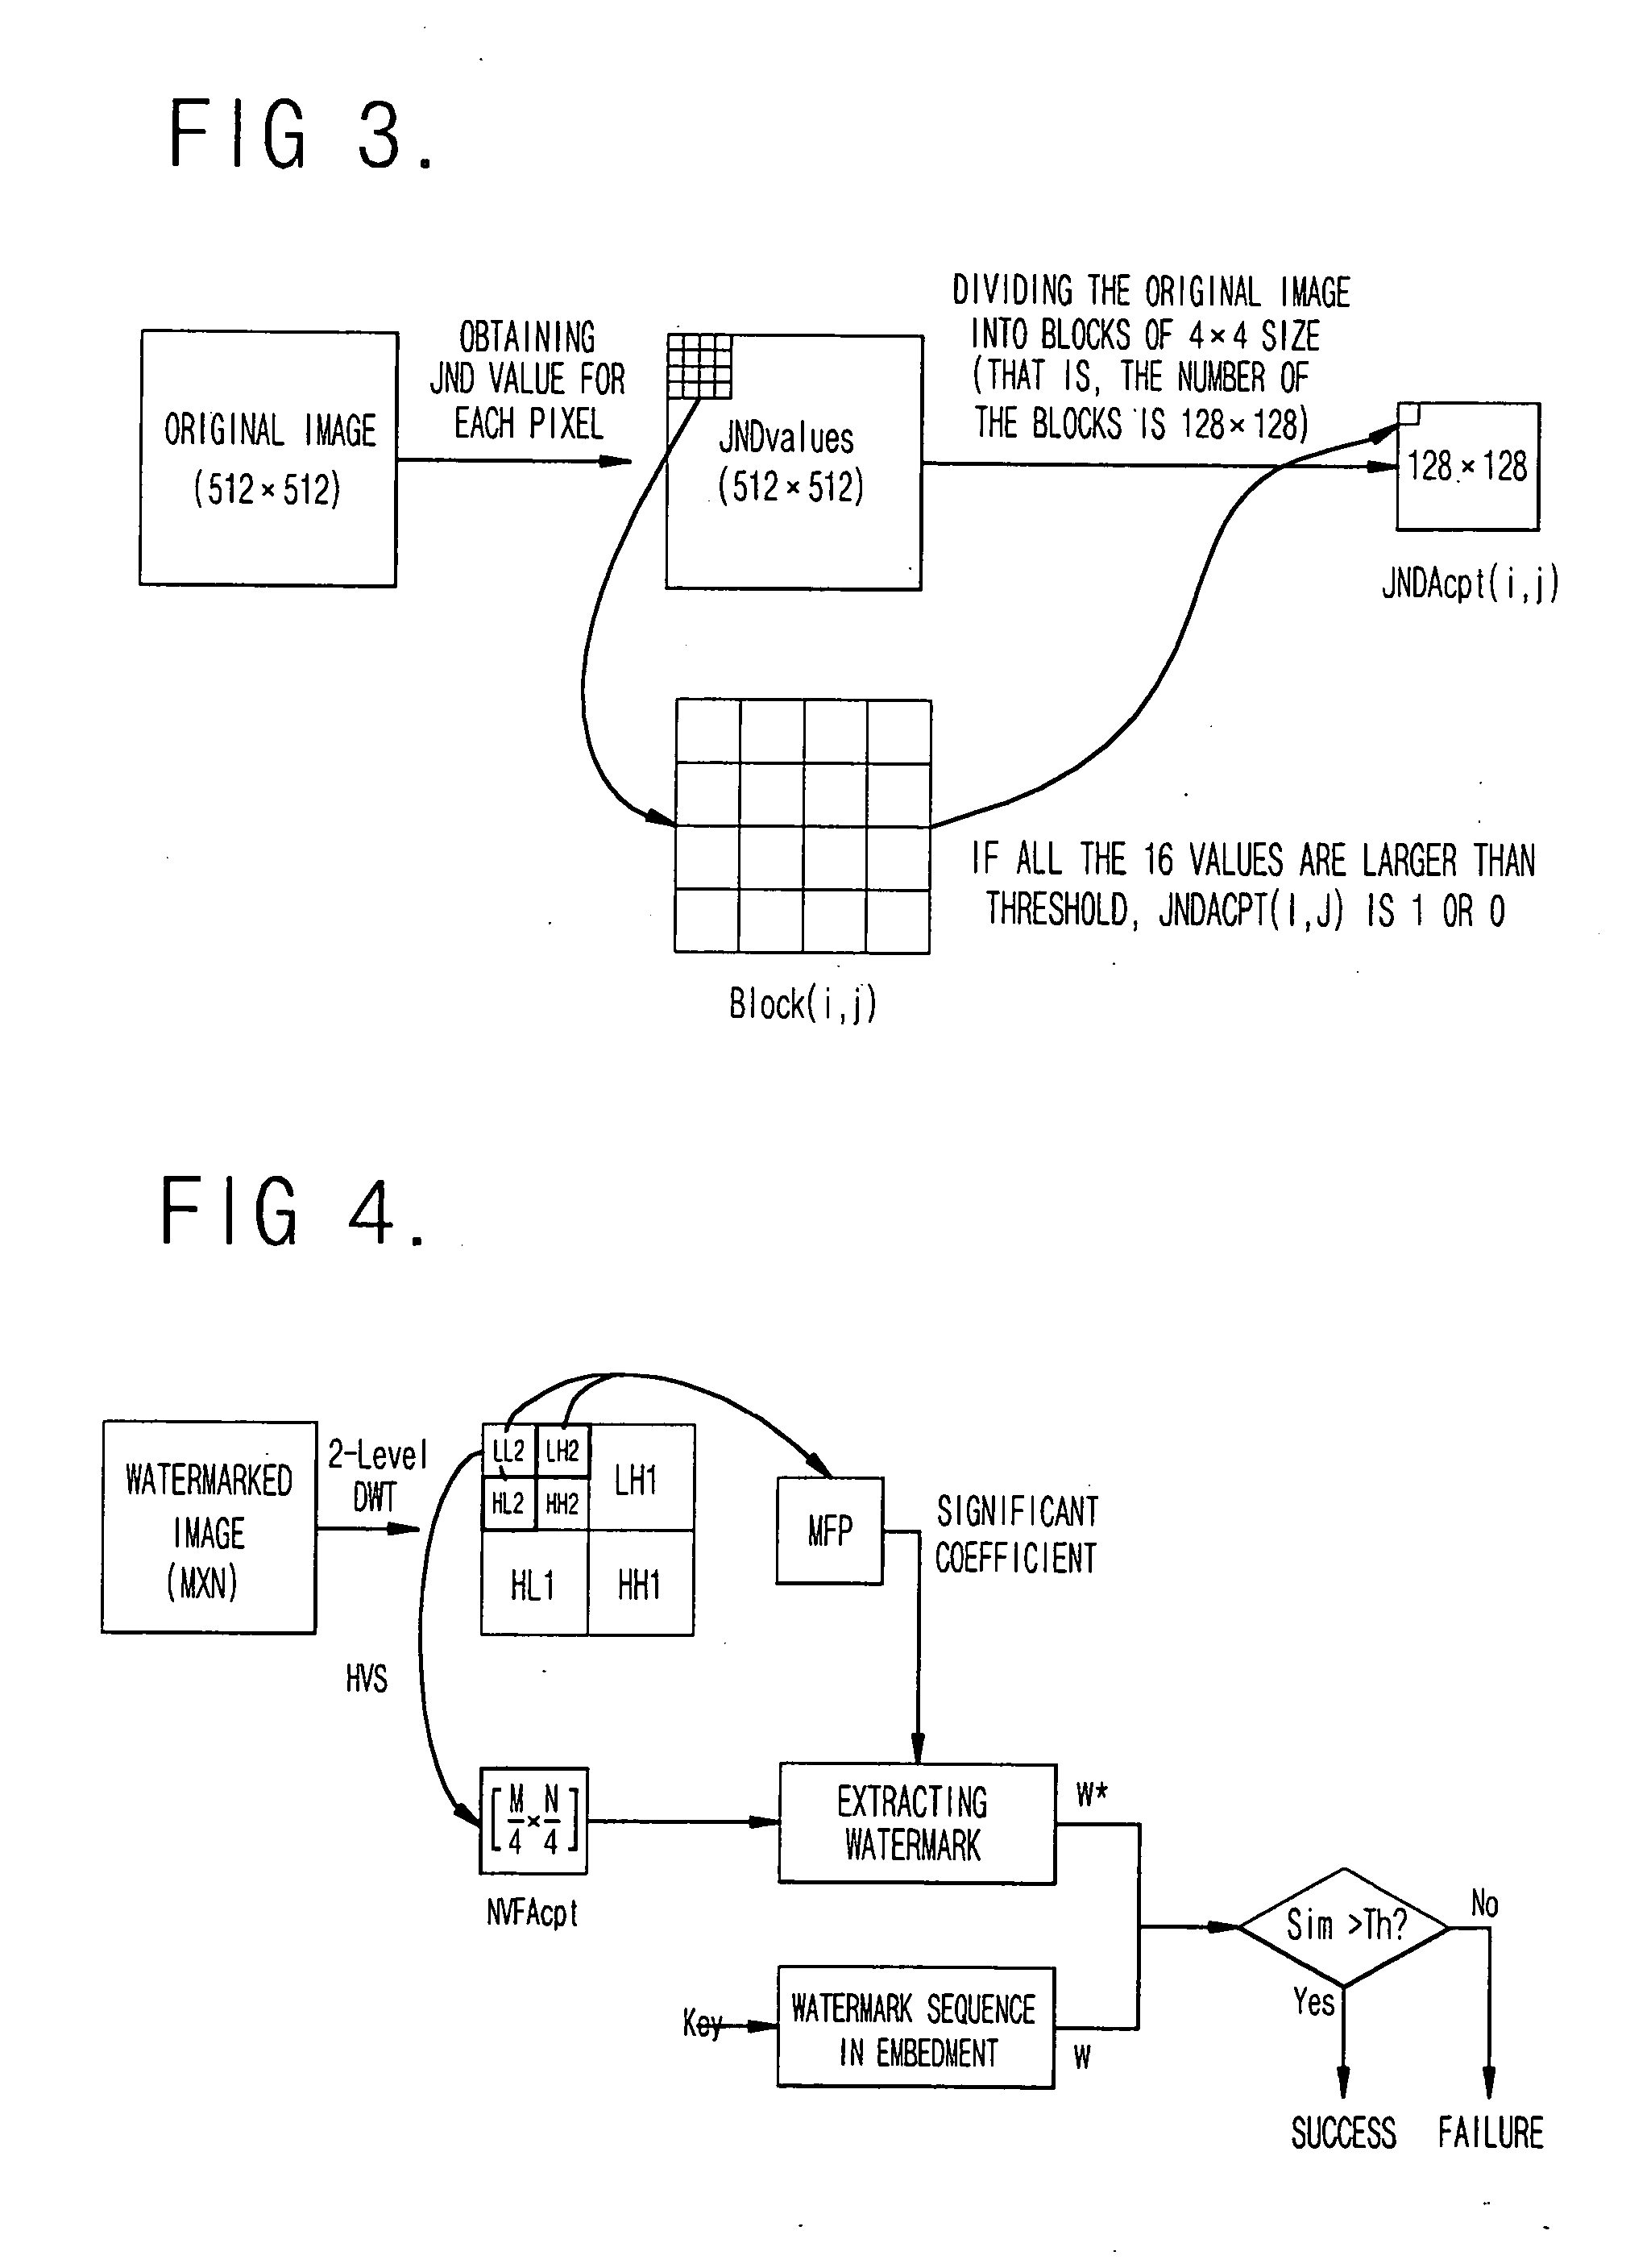 Method for blindly embedding and extracting a watermark by using wavelet transform and an HVS model